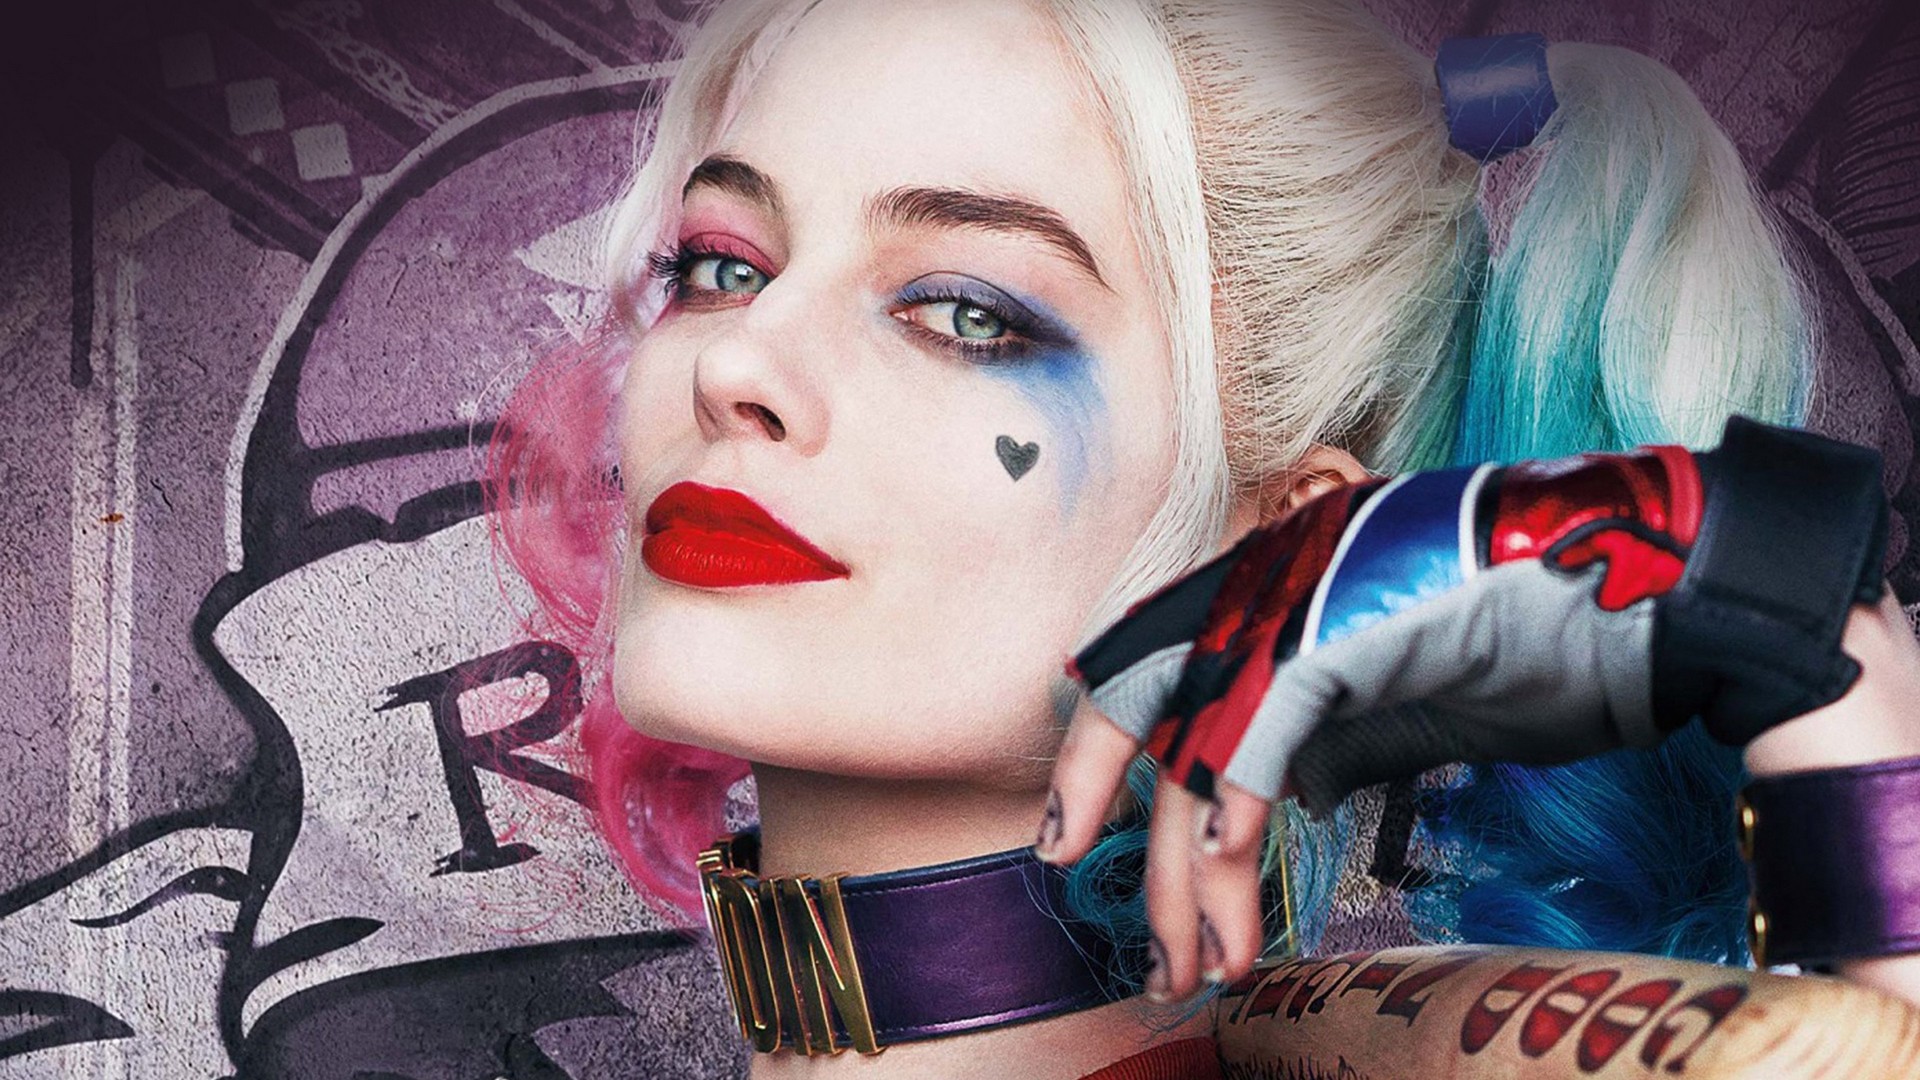 Harley Quinn Pictures Wallpaper For Desktop with image resolution 1920x1080 pixel. You can use this wallpaper as background for your desktop Computer Screensavers, Android or iPhone smartphones